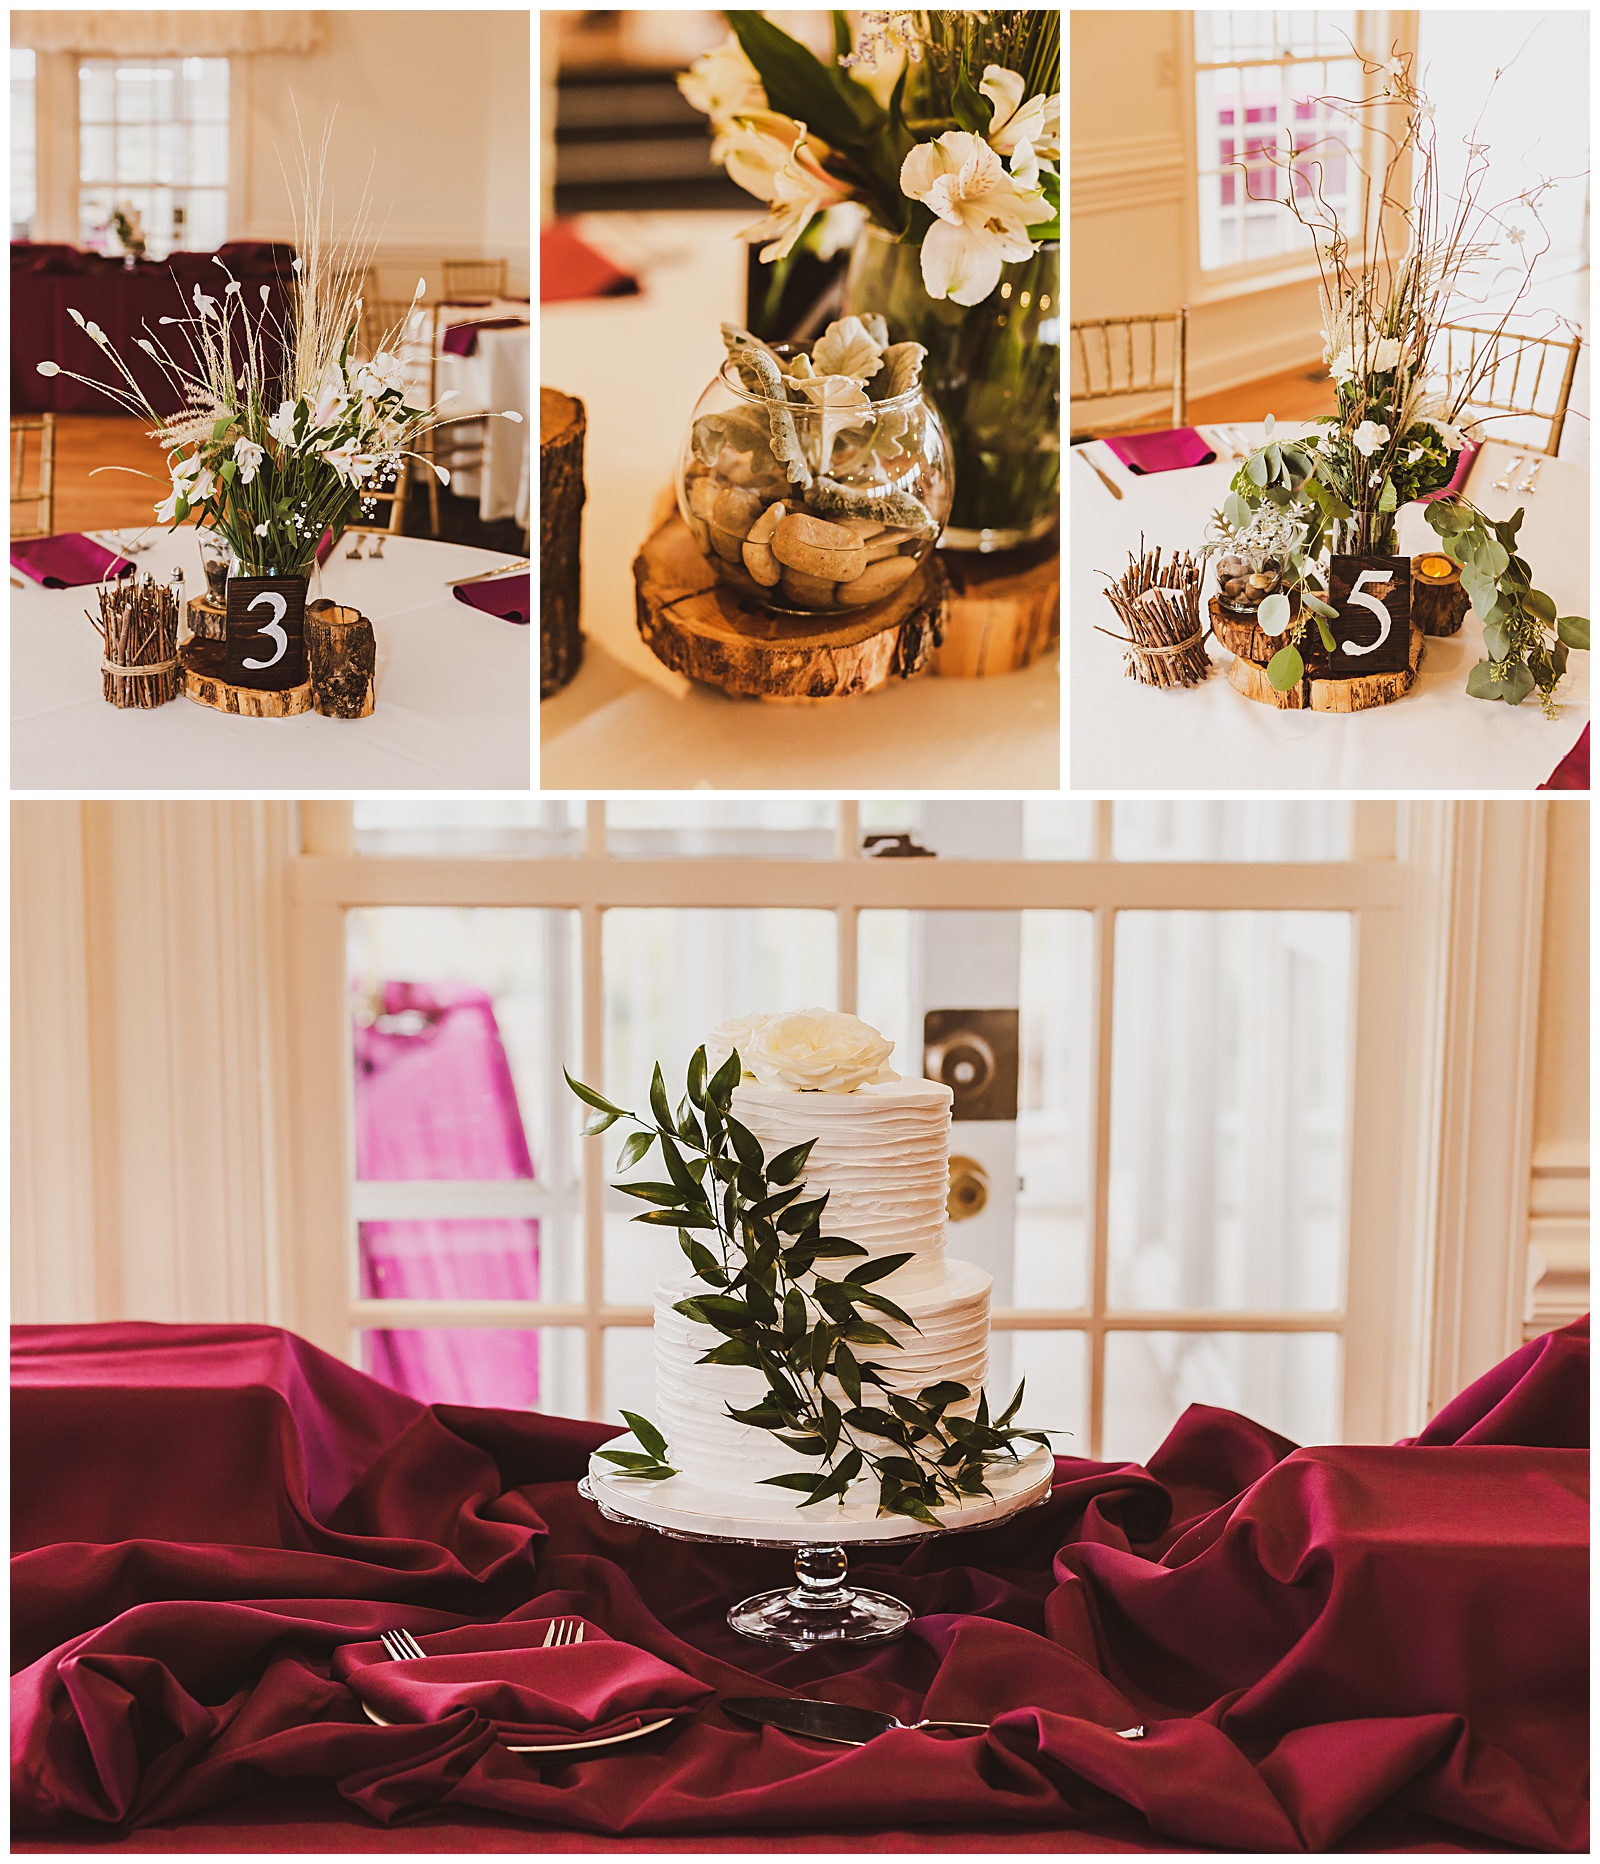 reception details at willow ridge manor in morrison, co